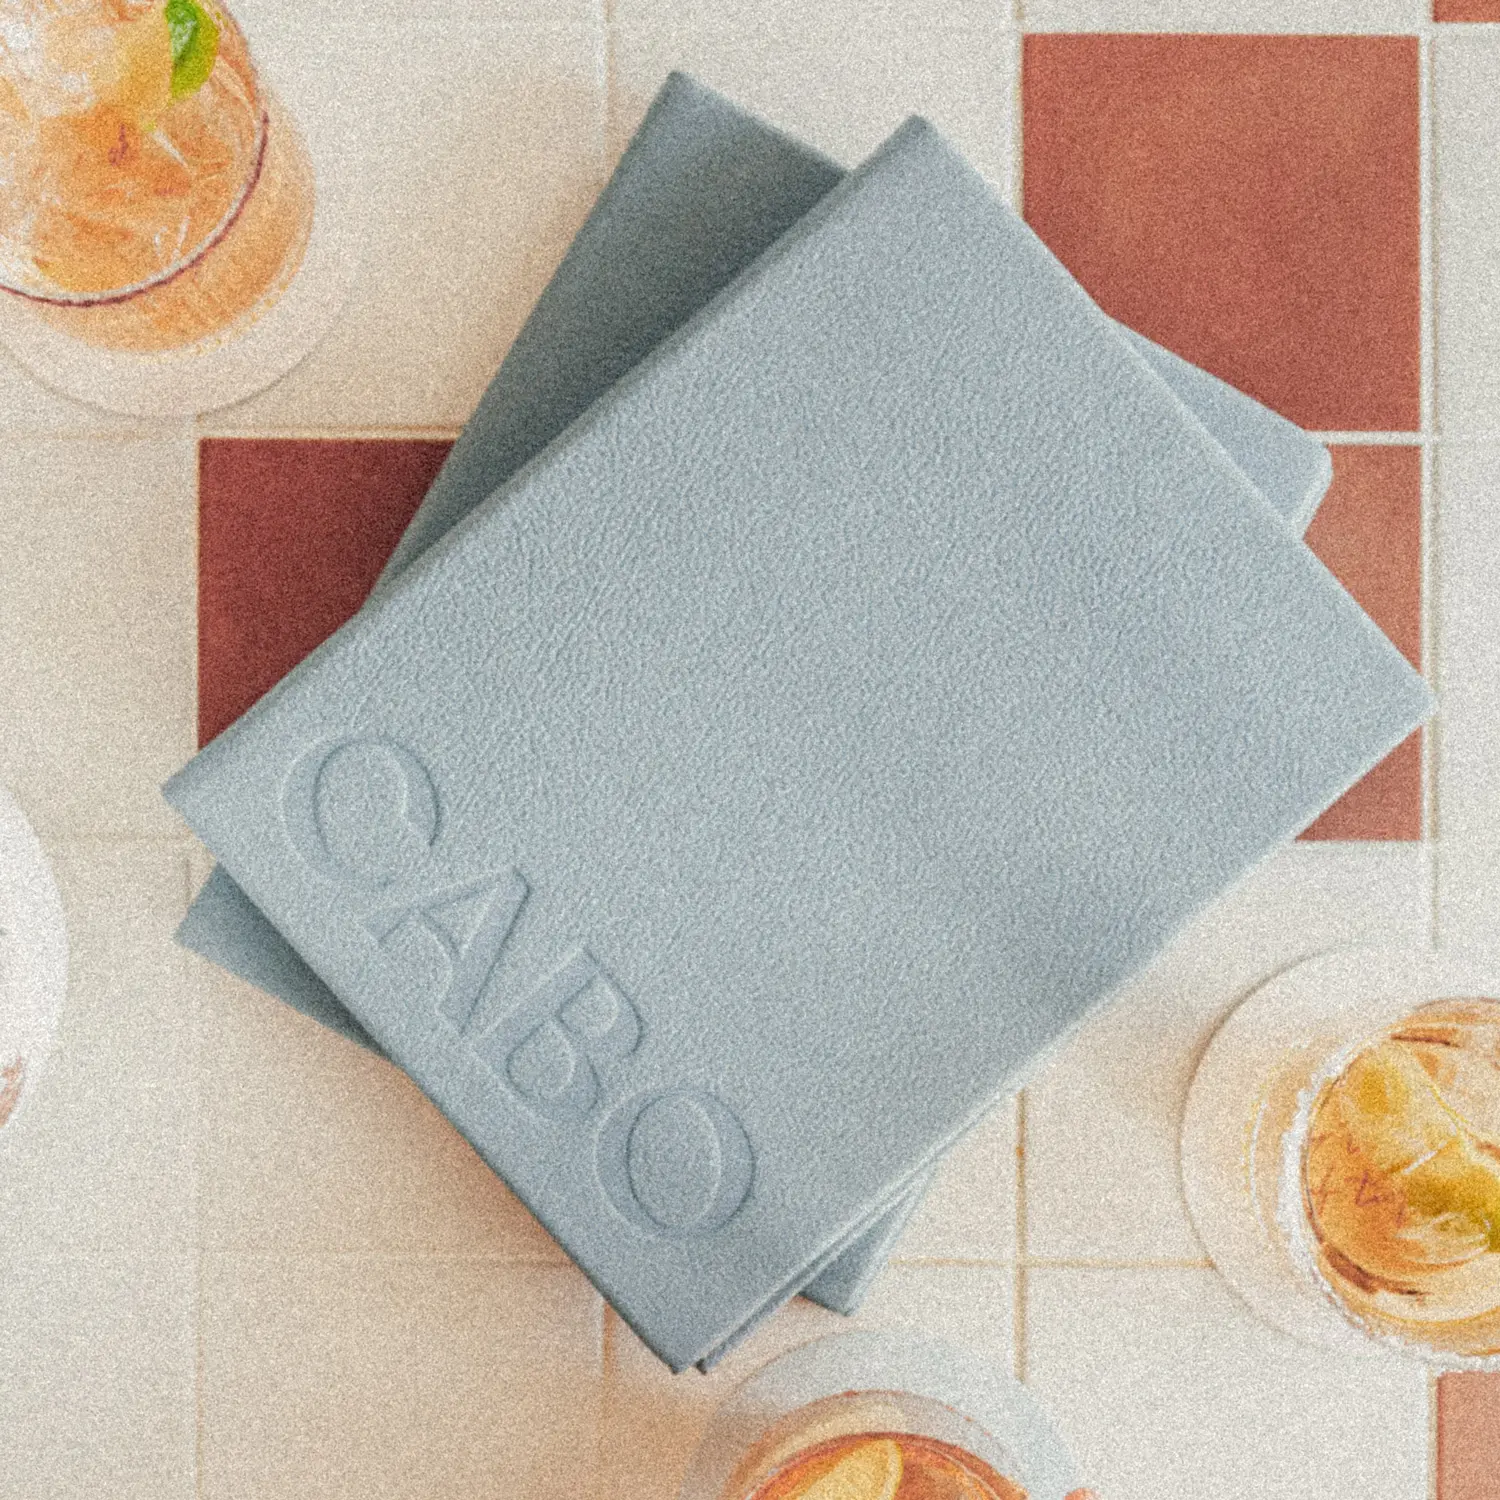 Cabo menus and cocktails